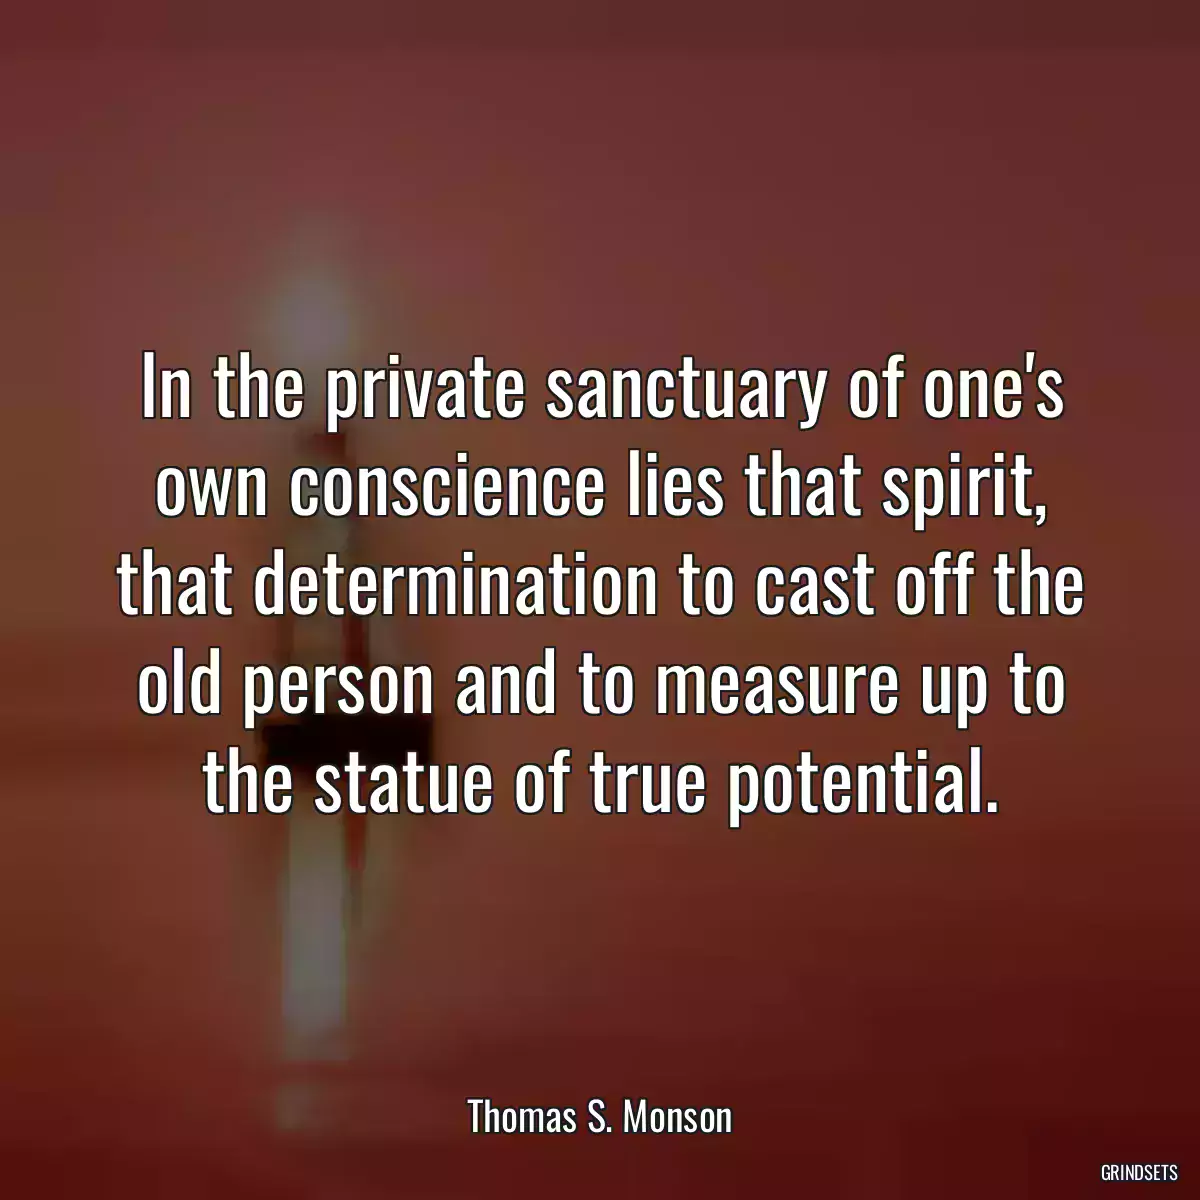 In the private sanctuary of one\'s own conscience lies that spirit, that determination to cast off the old person and to measure up to the statue of true potential.